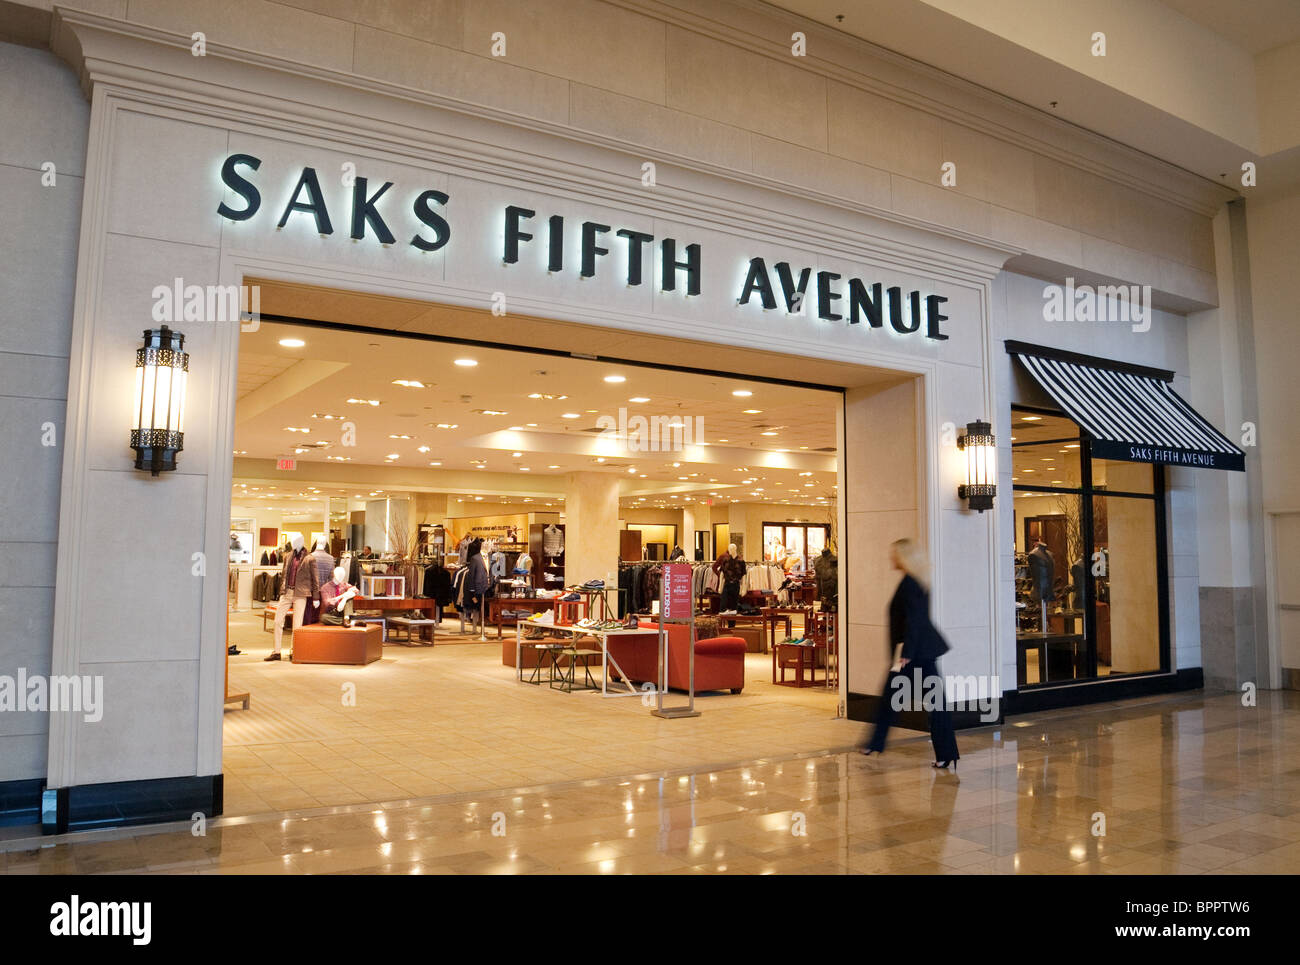 Saks Fifth Avenue opens revamped Houston store